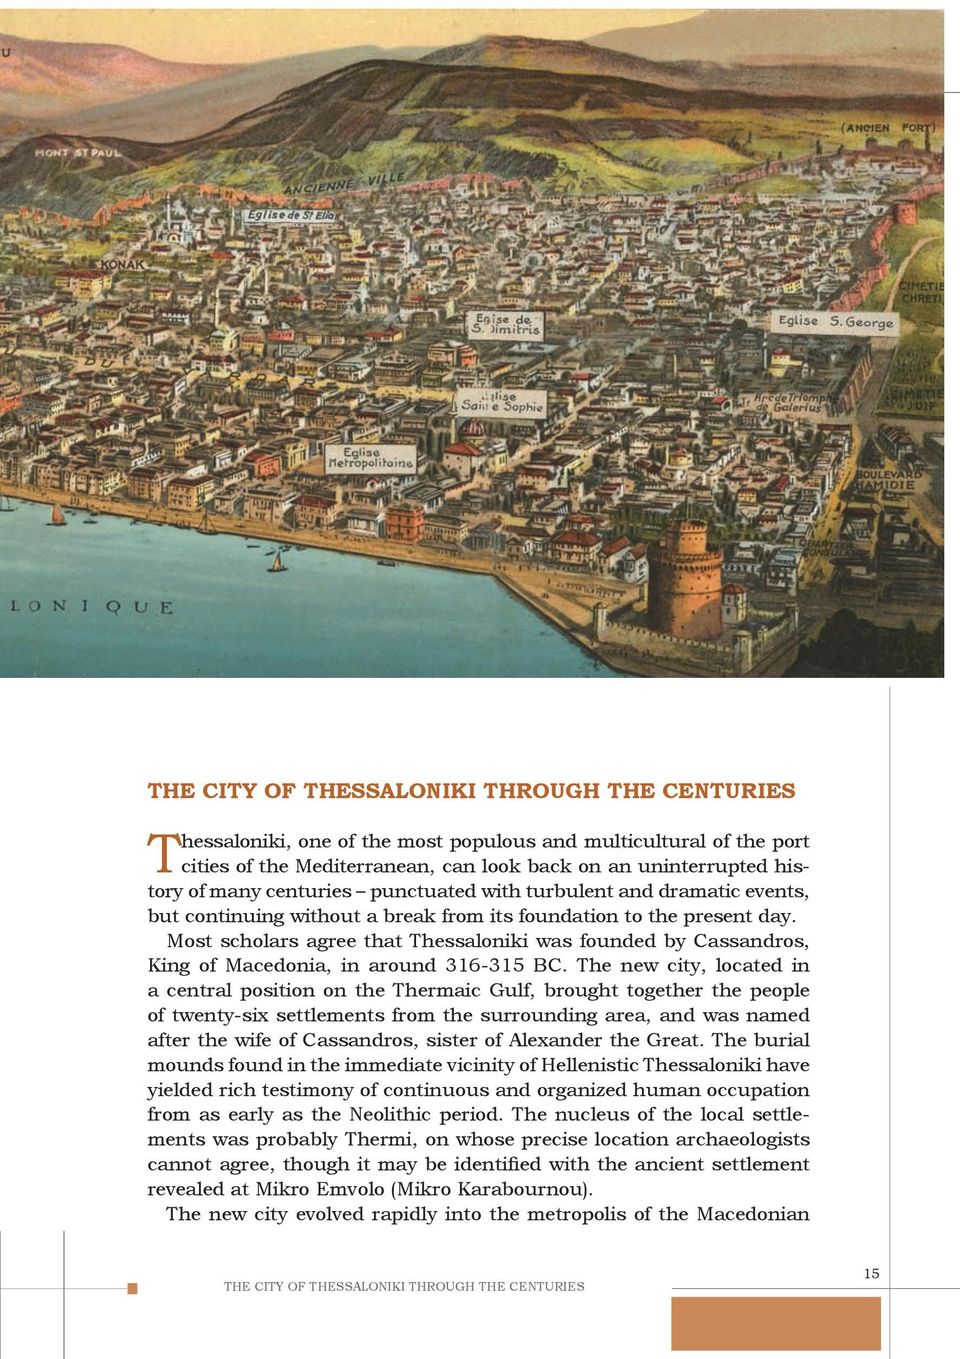 Most scholars agree that Thessaloniki was founded by Cassandros, King of Macedonia, in around 316-315 BC.